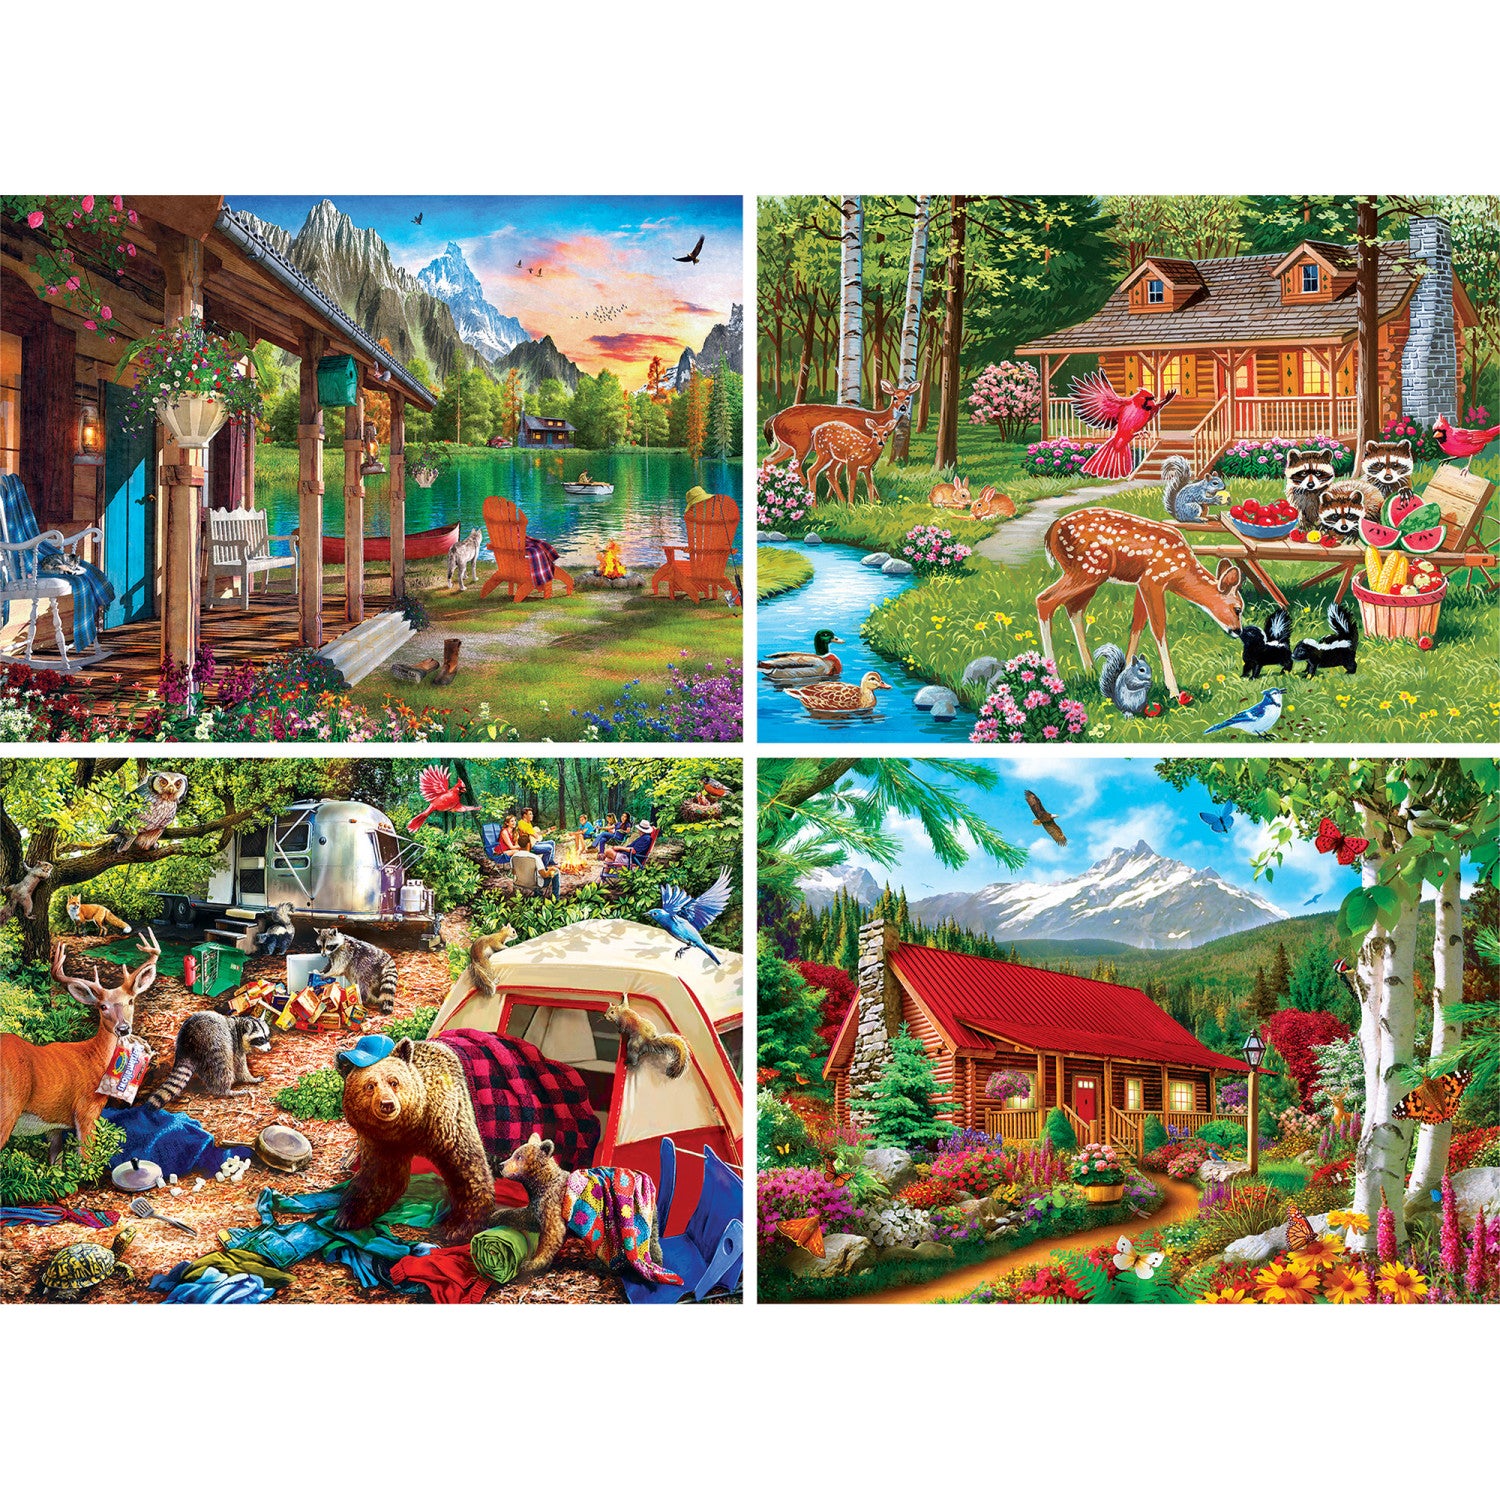 Space Savers - Great Outdoors 4-Pack 500 Piece Puzzle Assortment